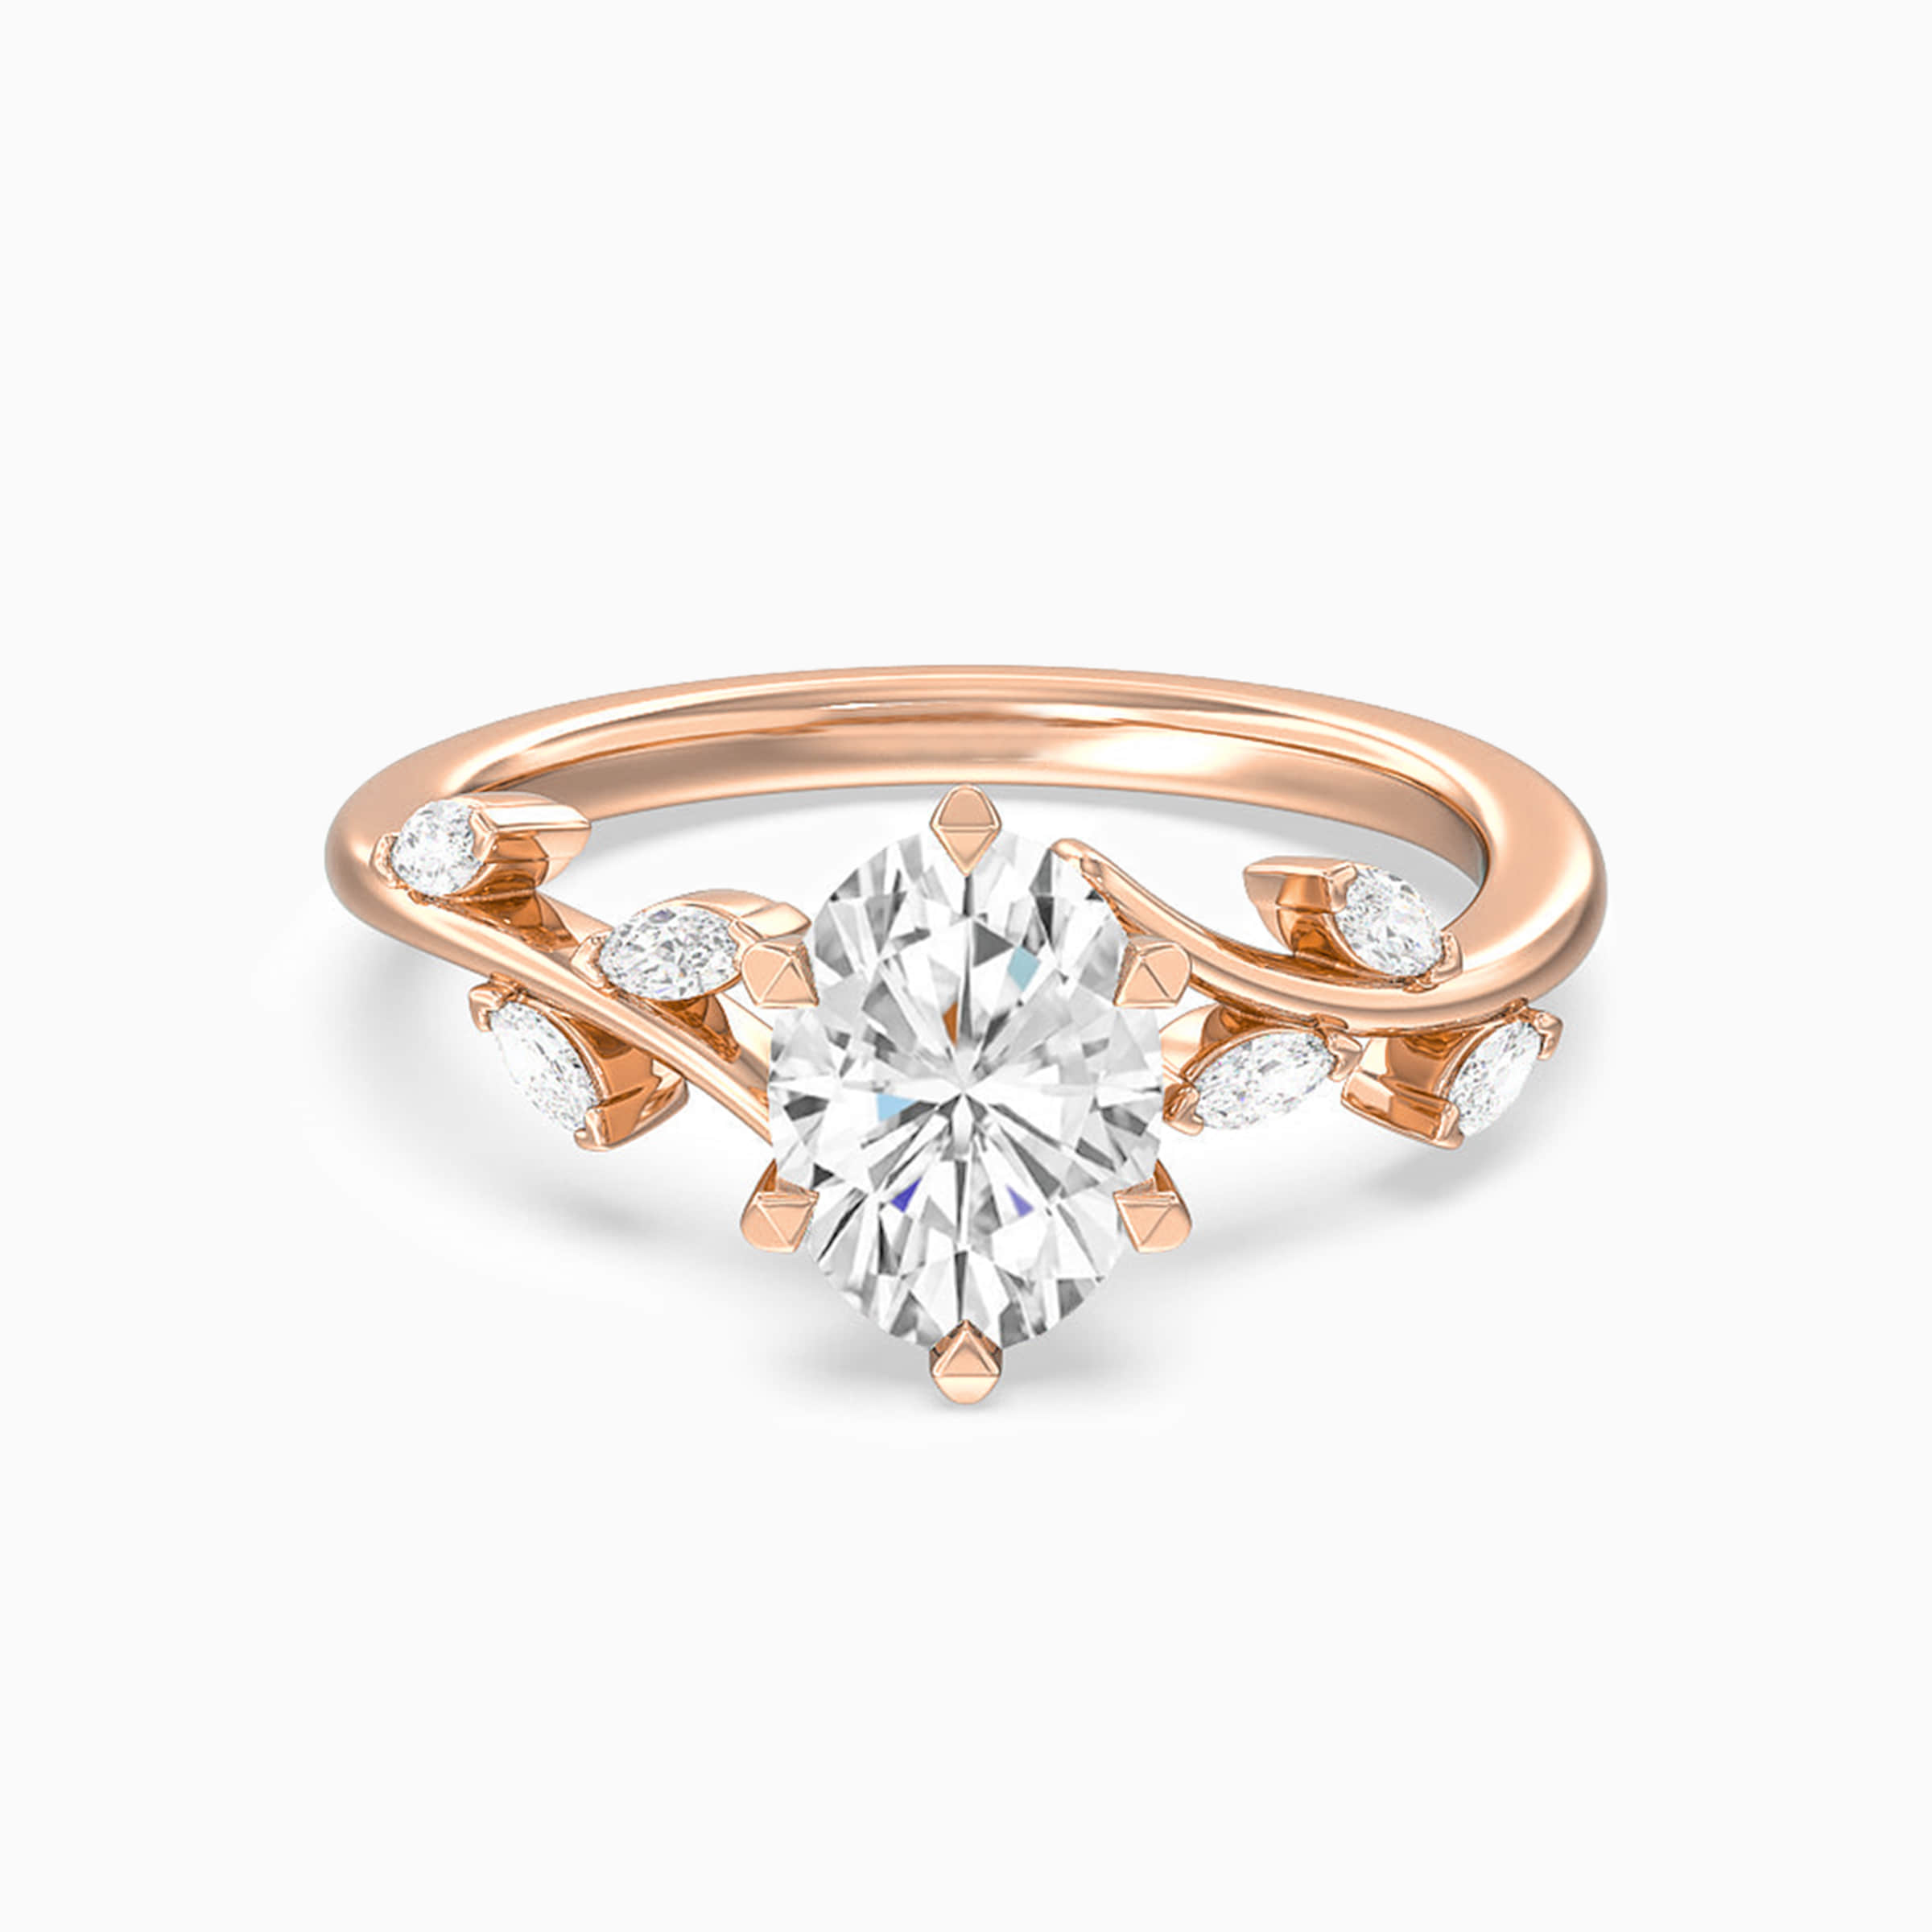 Darry Ring oval diamond bypass engagement ring in rose gold